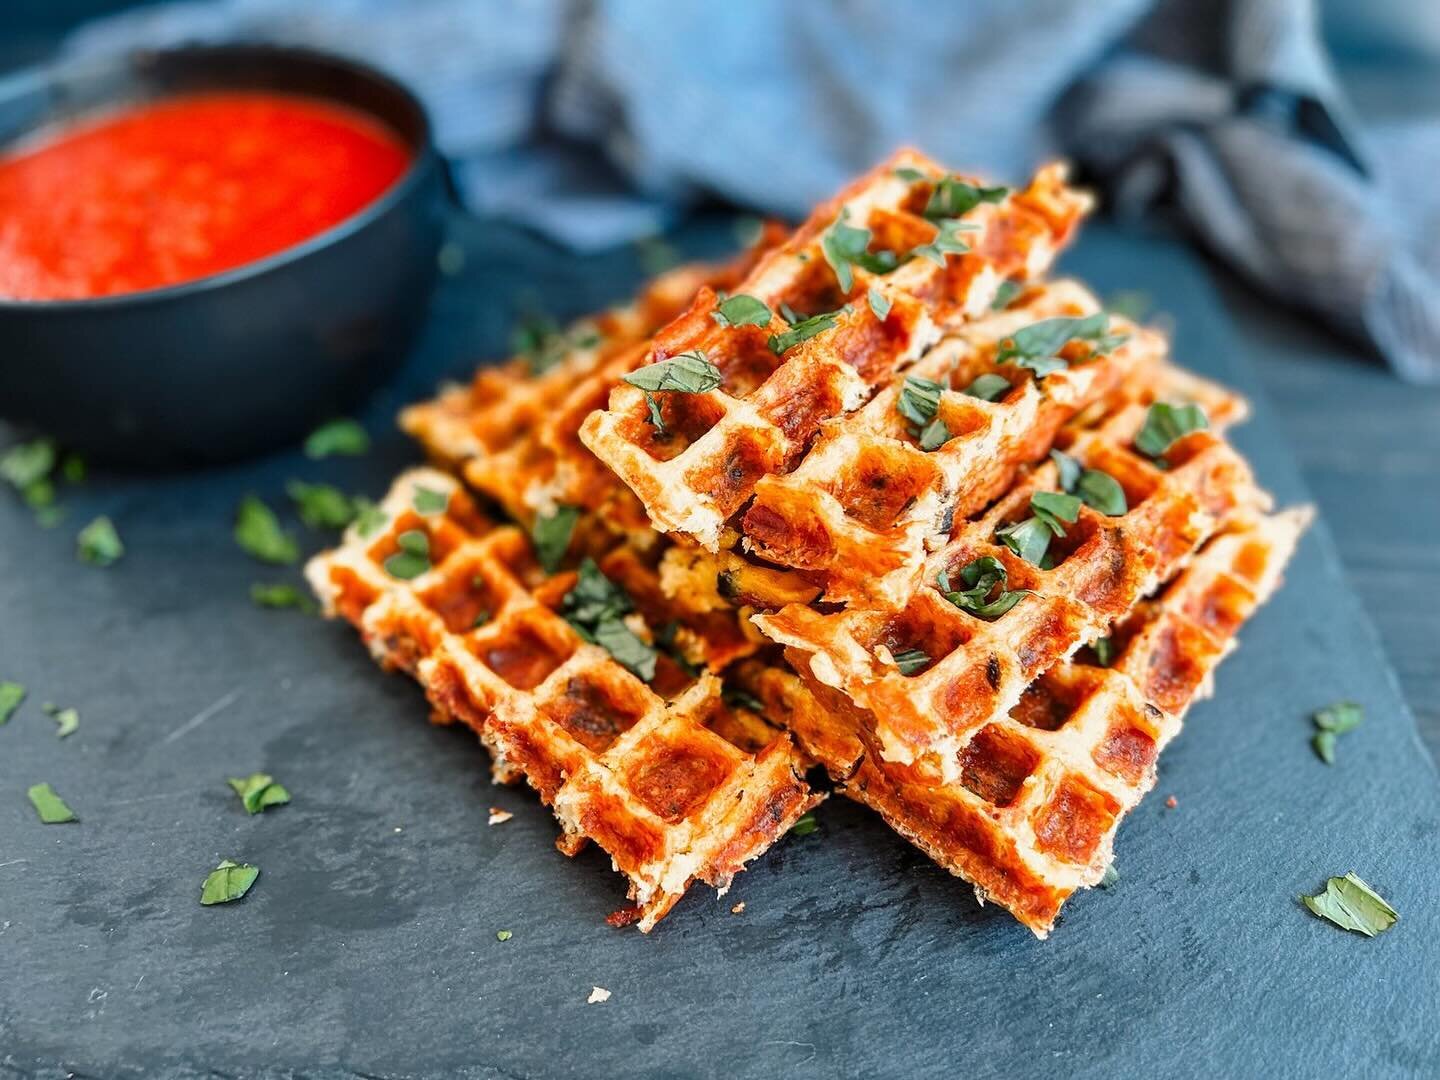 Today is #WaffleDay but have you tried #Chaffles? 

What if I told you that you can enjoy all of the pizza flavors without any of the carbs and enjoy it as a waffle format? Well good news! You can with this delicious Pizza Chaffle recipe! Chaffles ar